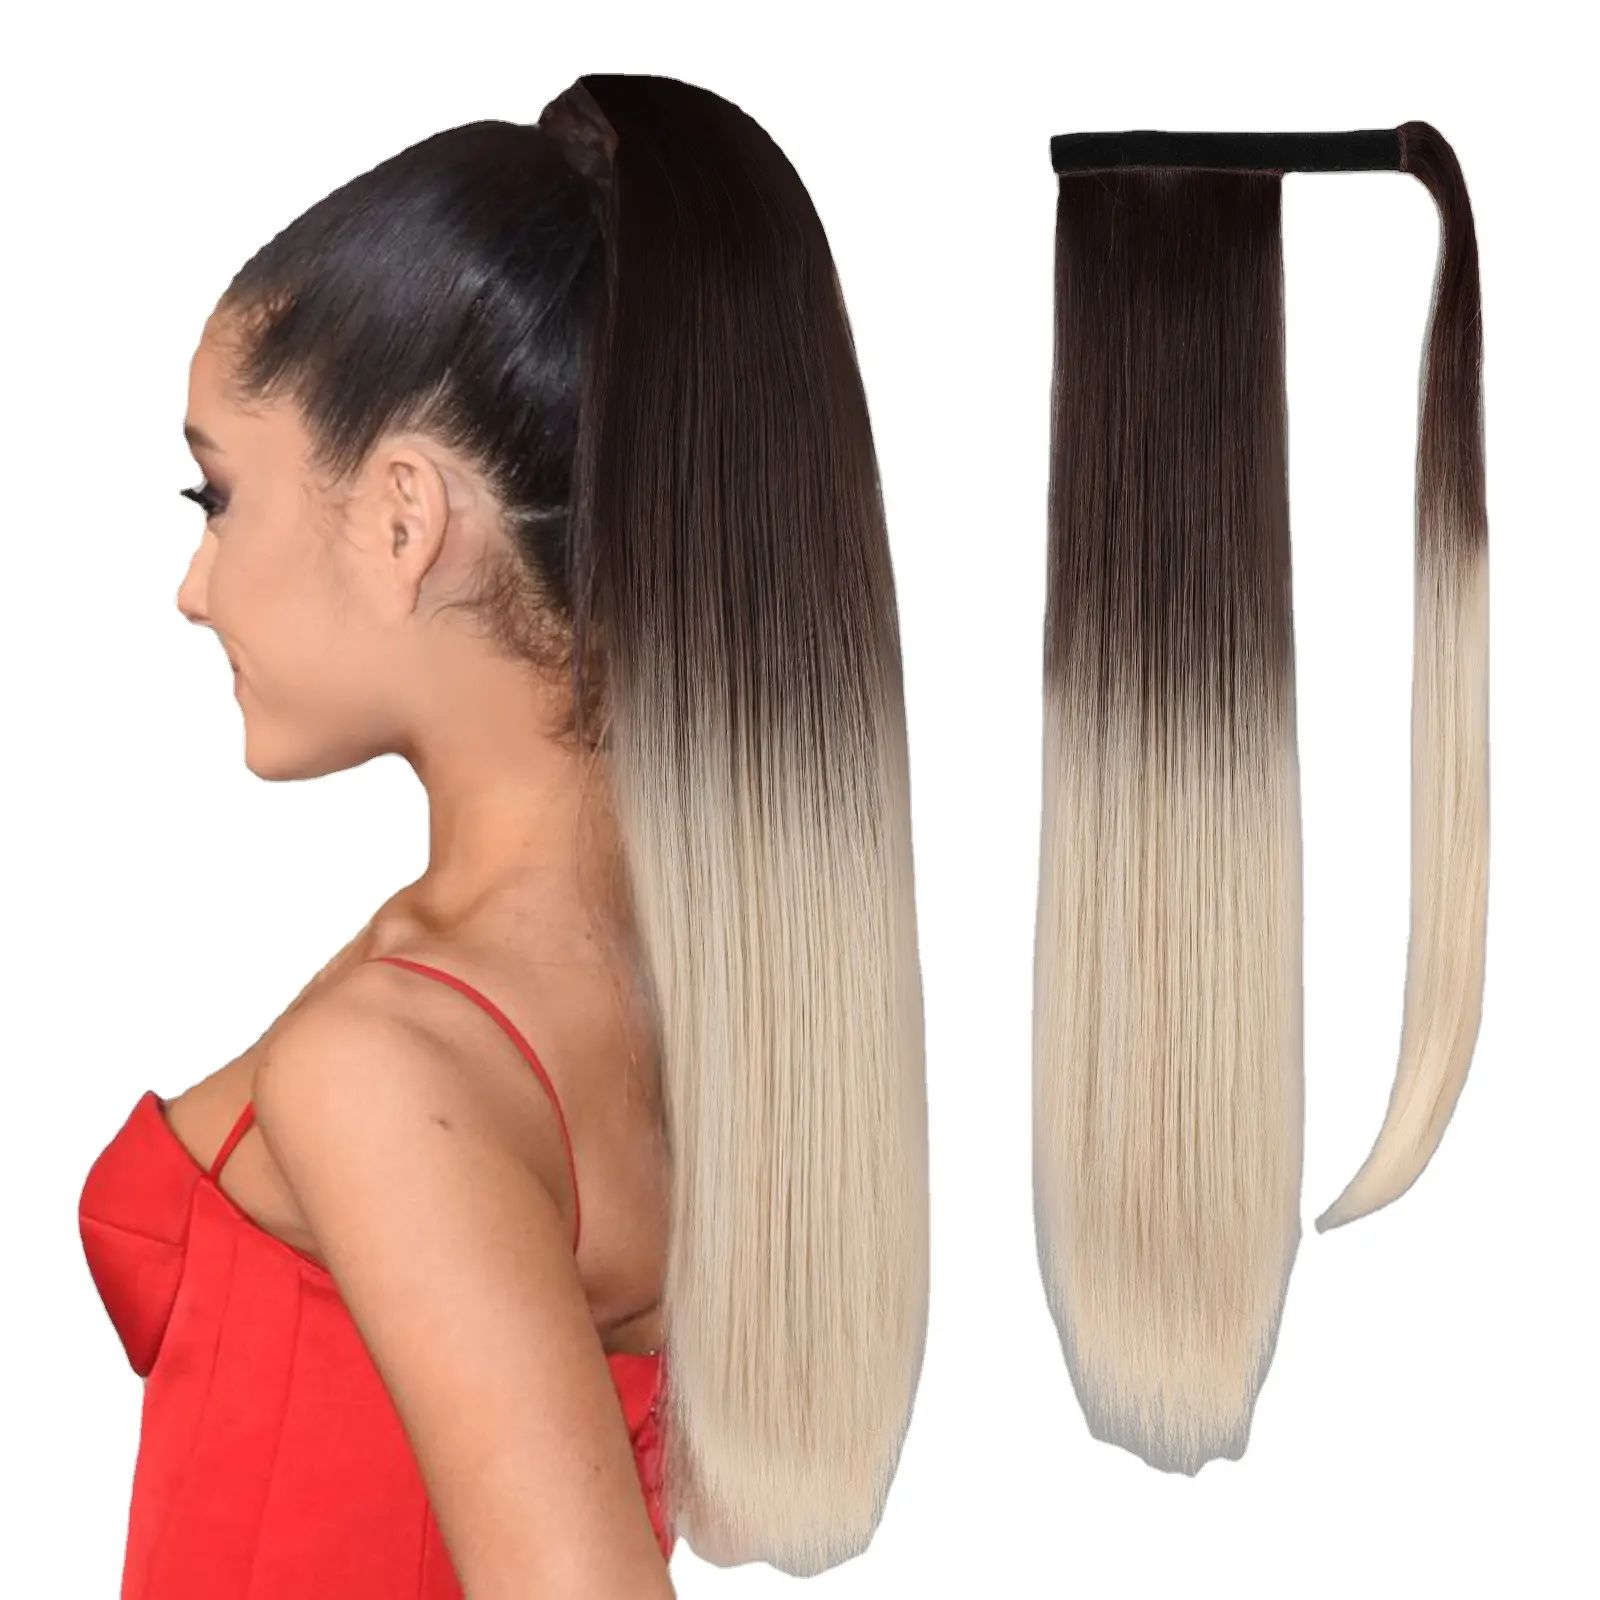 26 Inches Natural Long Straight Synthetic Ponytail Wrap Around Hair Extension Natural Hairpiece Headwear Heat Resistant